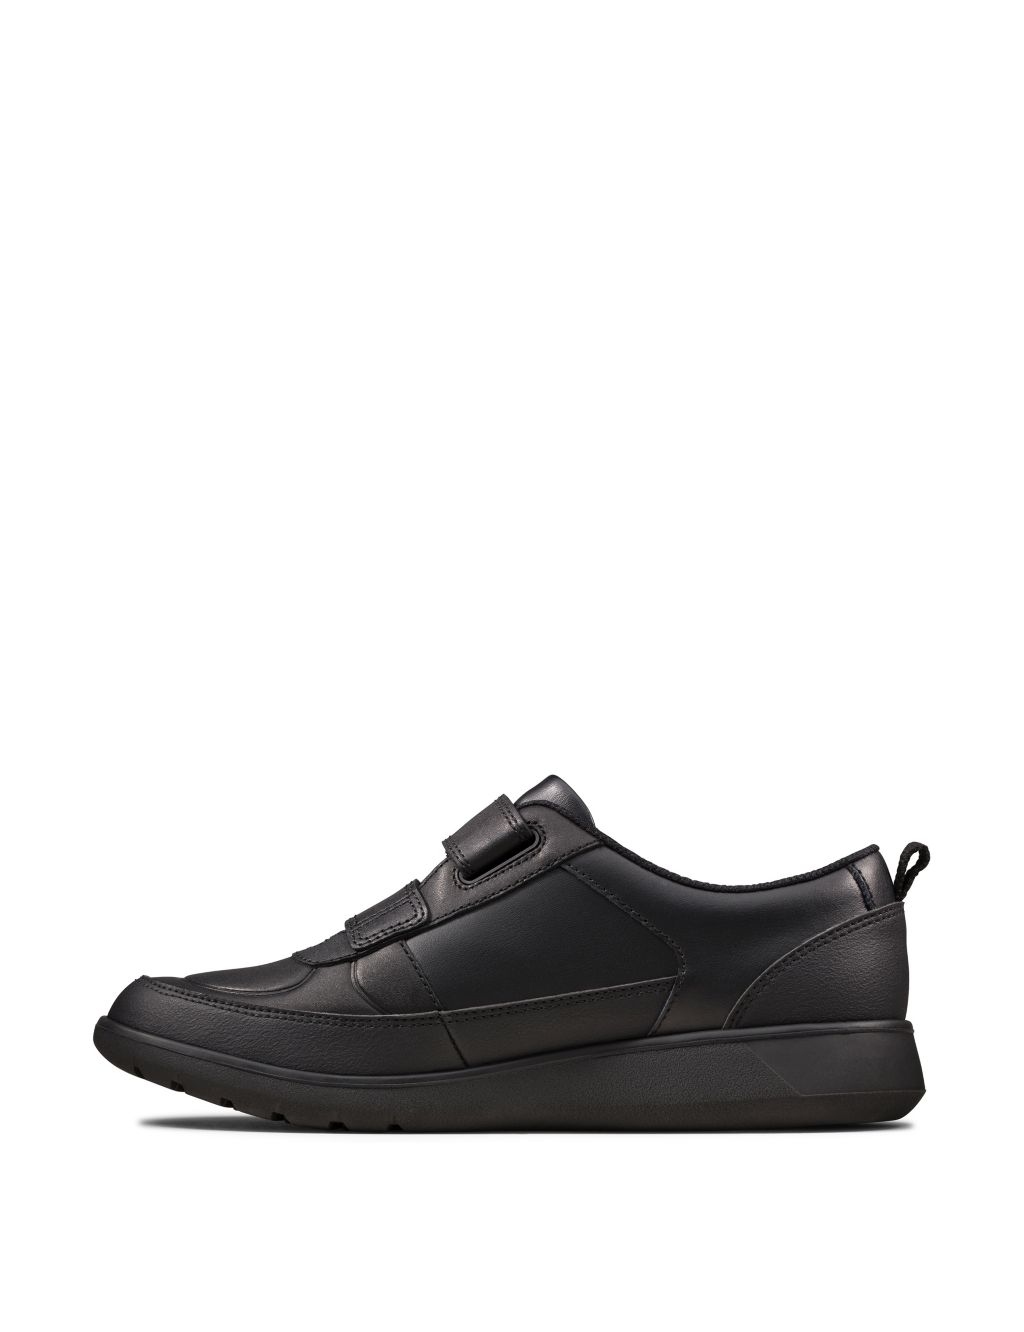 Kids' Leather Riptape School Shoes (3 Small - 9 Small) | CLARKS | M&S